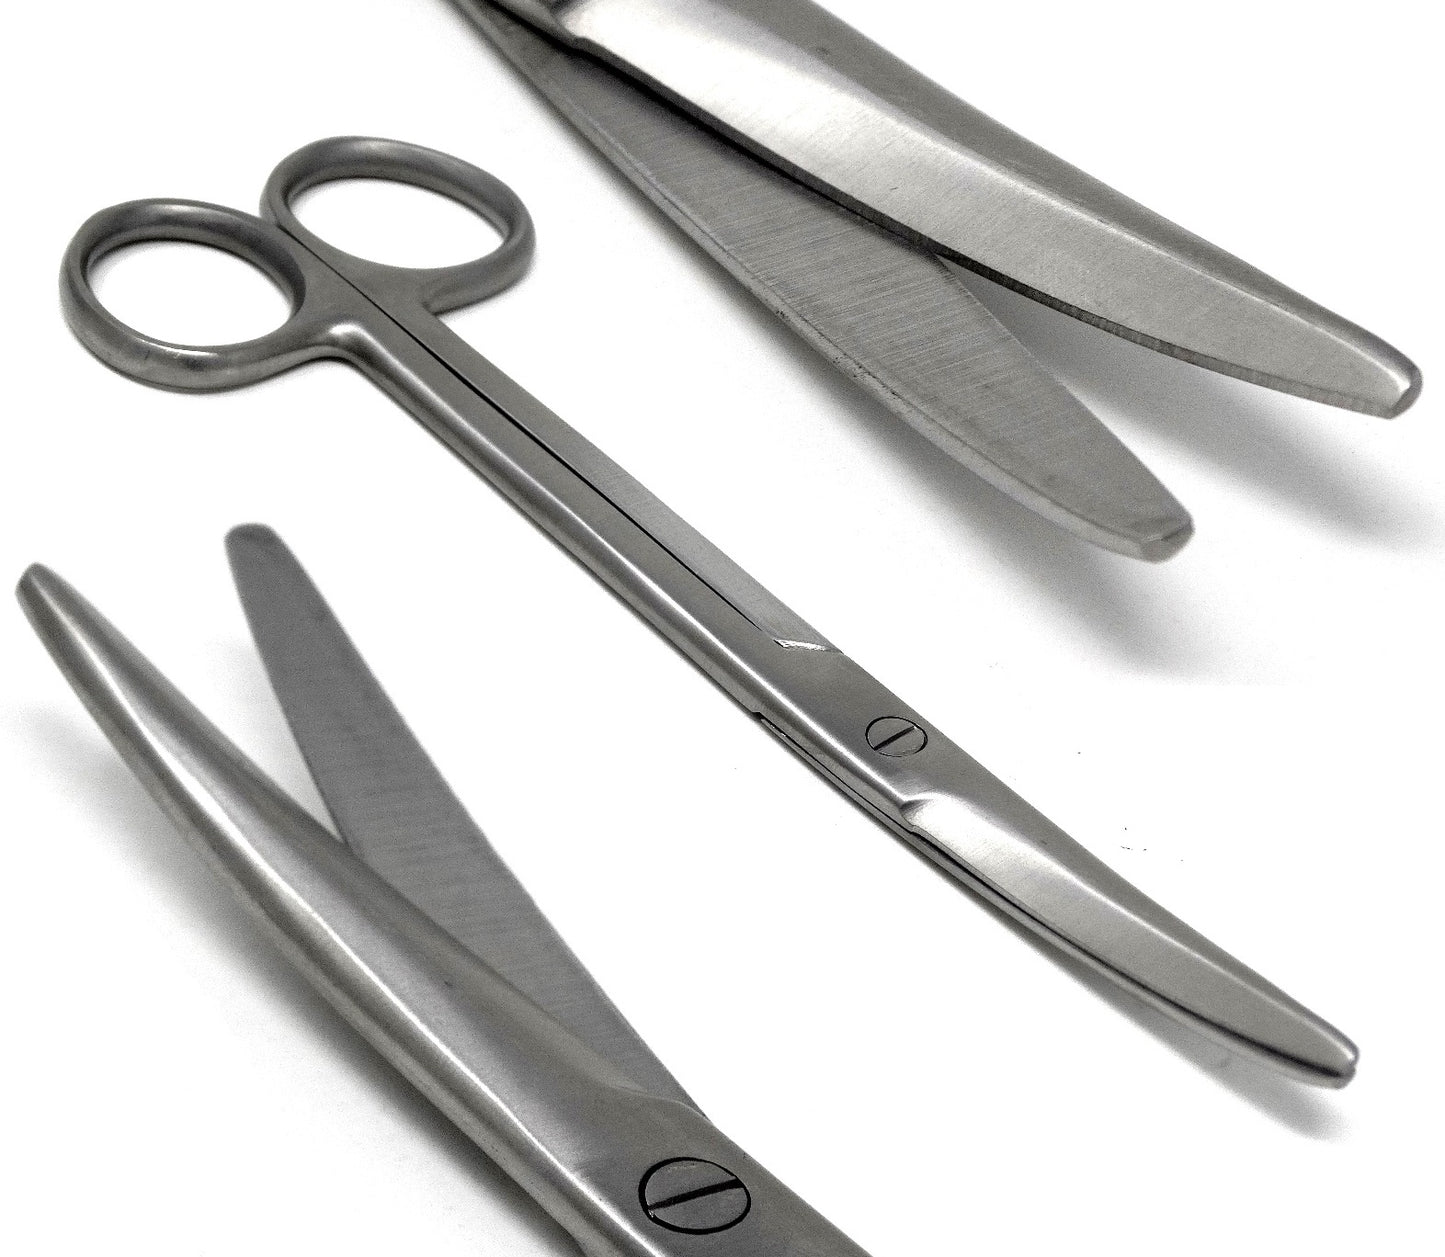 Mayo Dissecting Scissors 5.5" (14cm), Curved, Stainless Steel